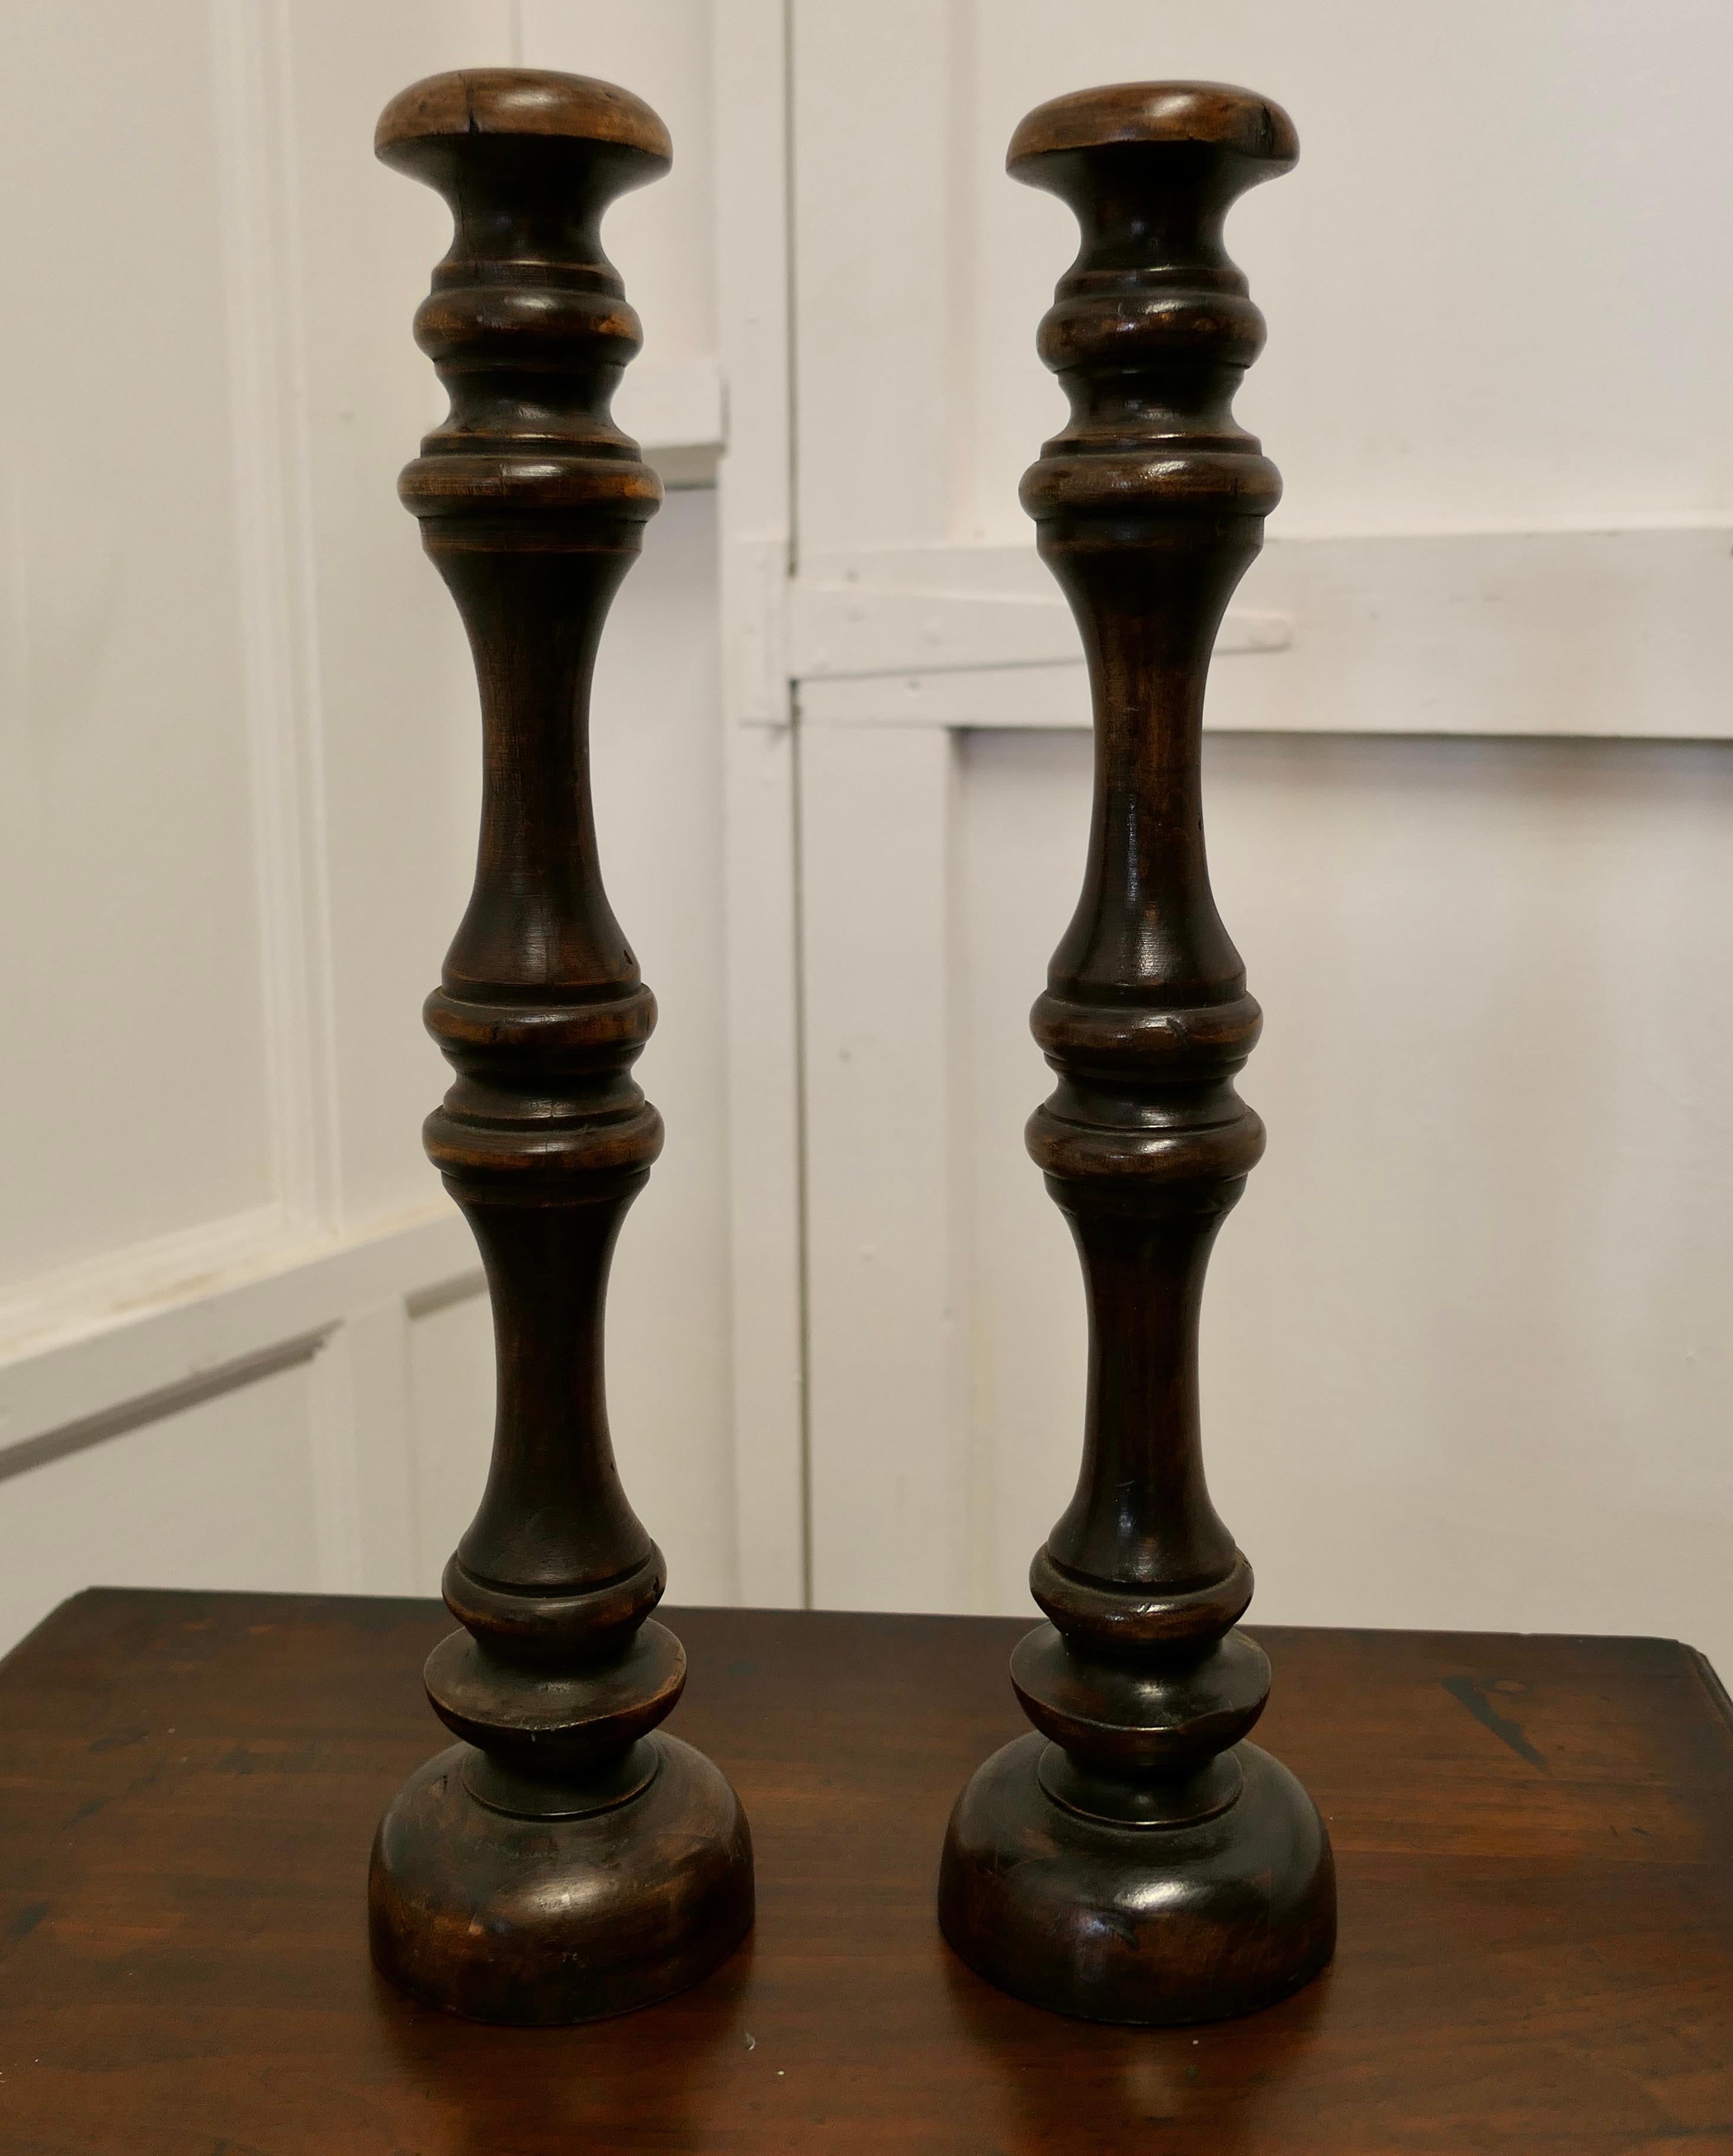 Pair of tall French turned wooden wig stands, shop display Hats

This is a superb Pair of high turned Wig Stands, they date from the late 19th Century, they have a long one piece turned upright column with a curved top rest set on a turned round